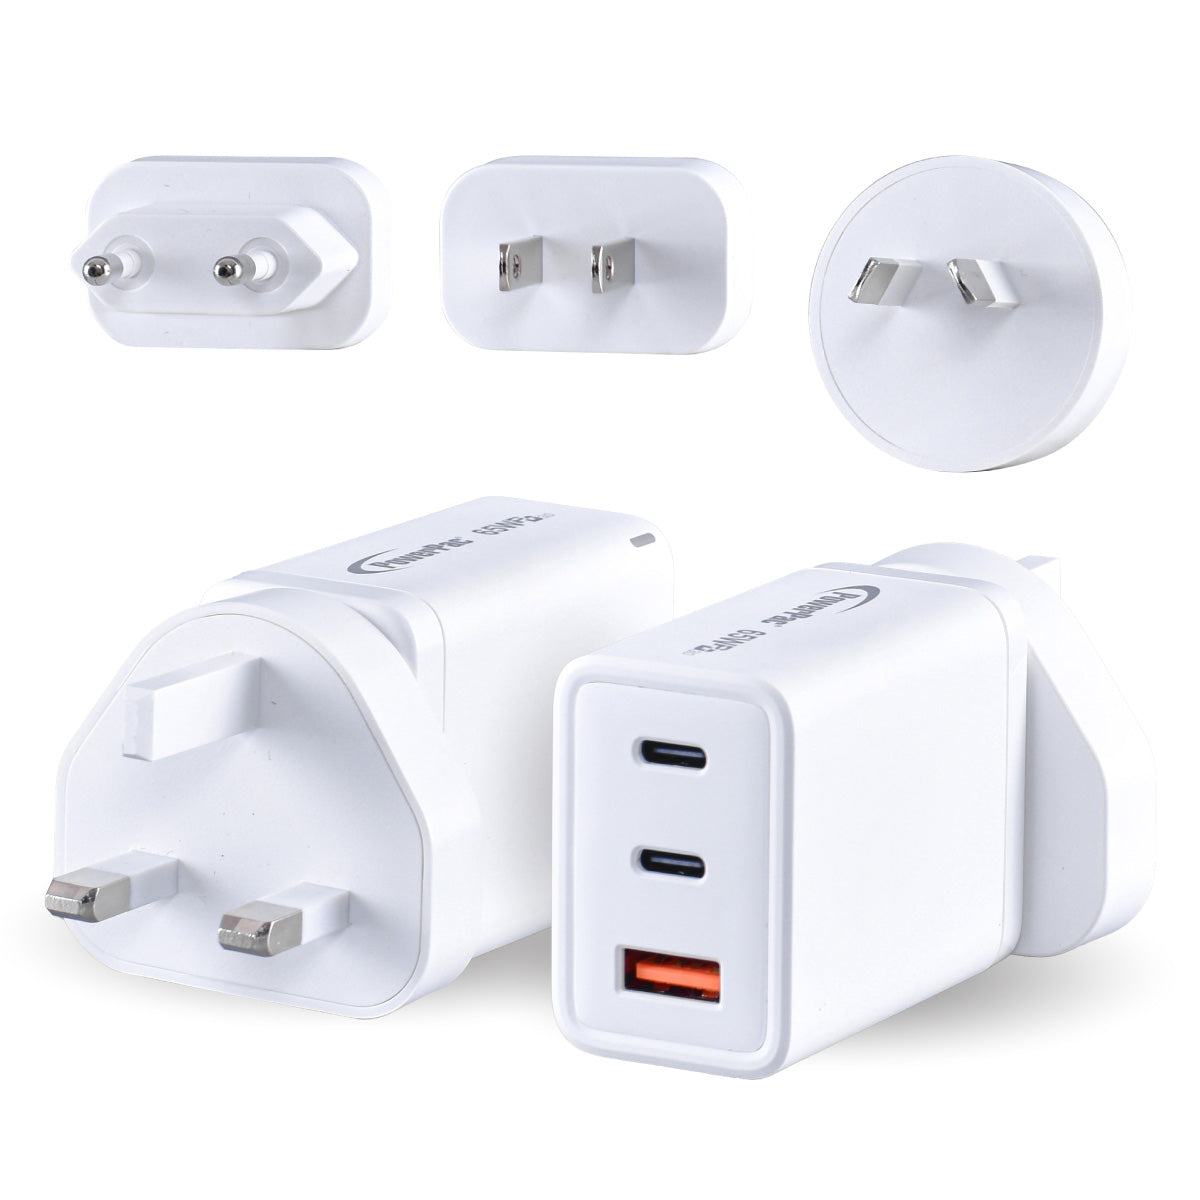 USB Travel Adapter 3 Pin Plug, Fast Charge, Smart Charge 65 Watts, Tablet Charger, Smart Phone Charger (PP7987)